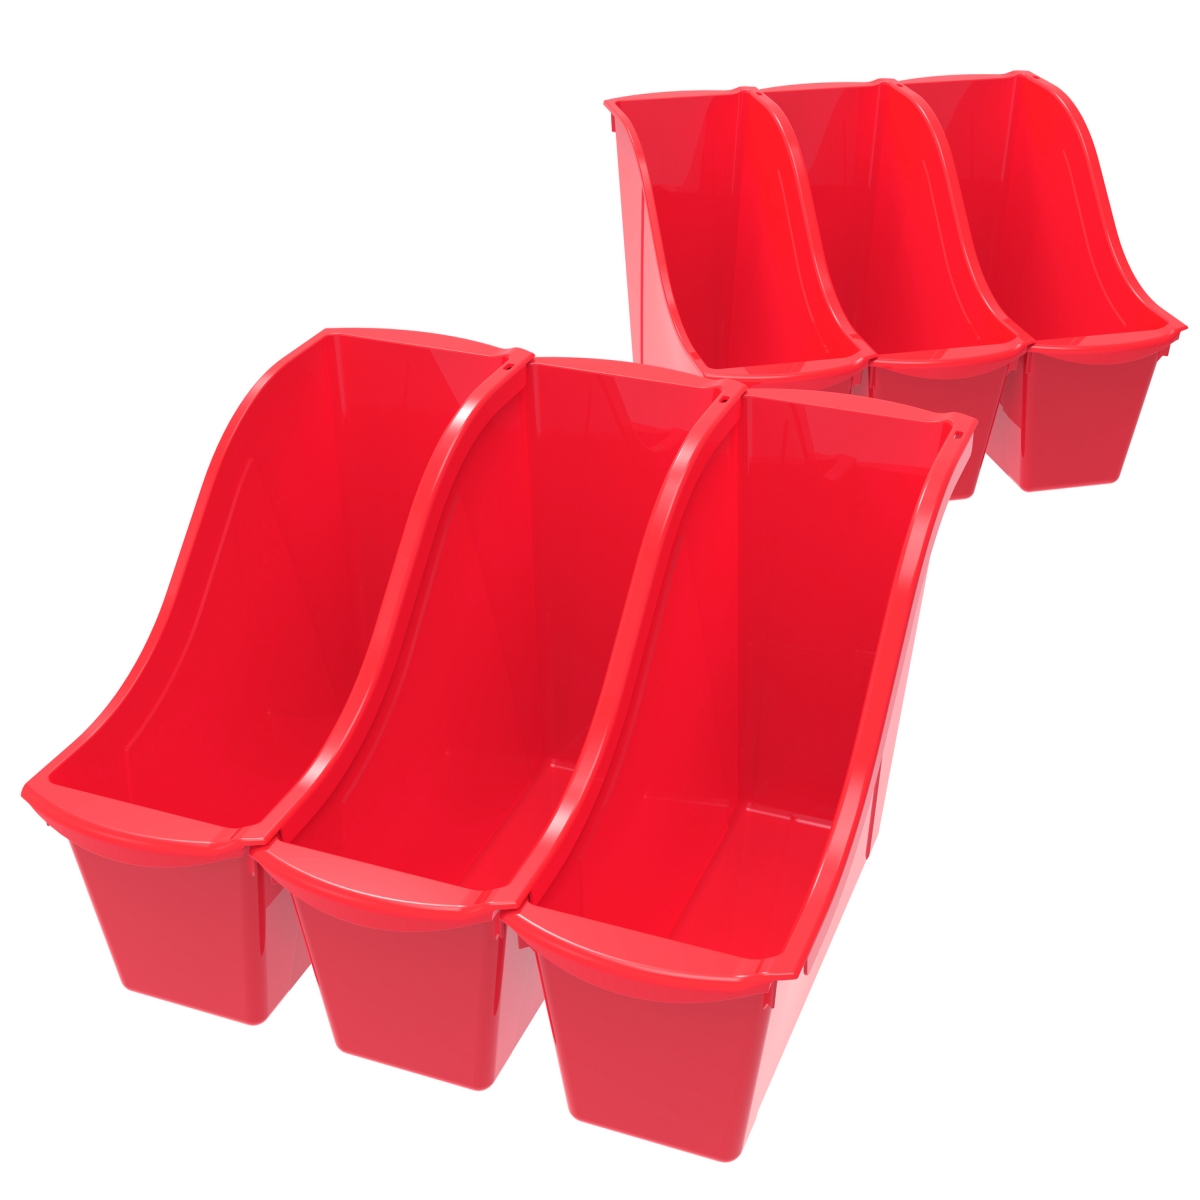 Picture of Storex 71109U06C Small Book Bin, Red - Pack of 6